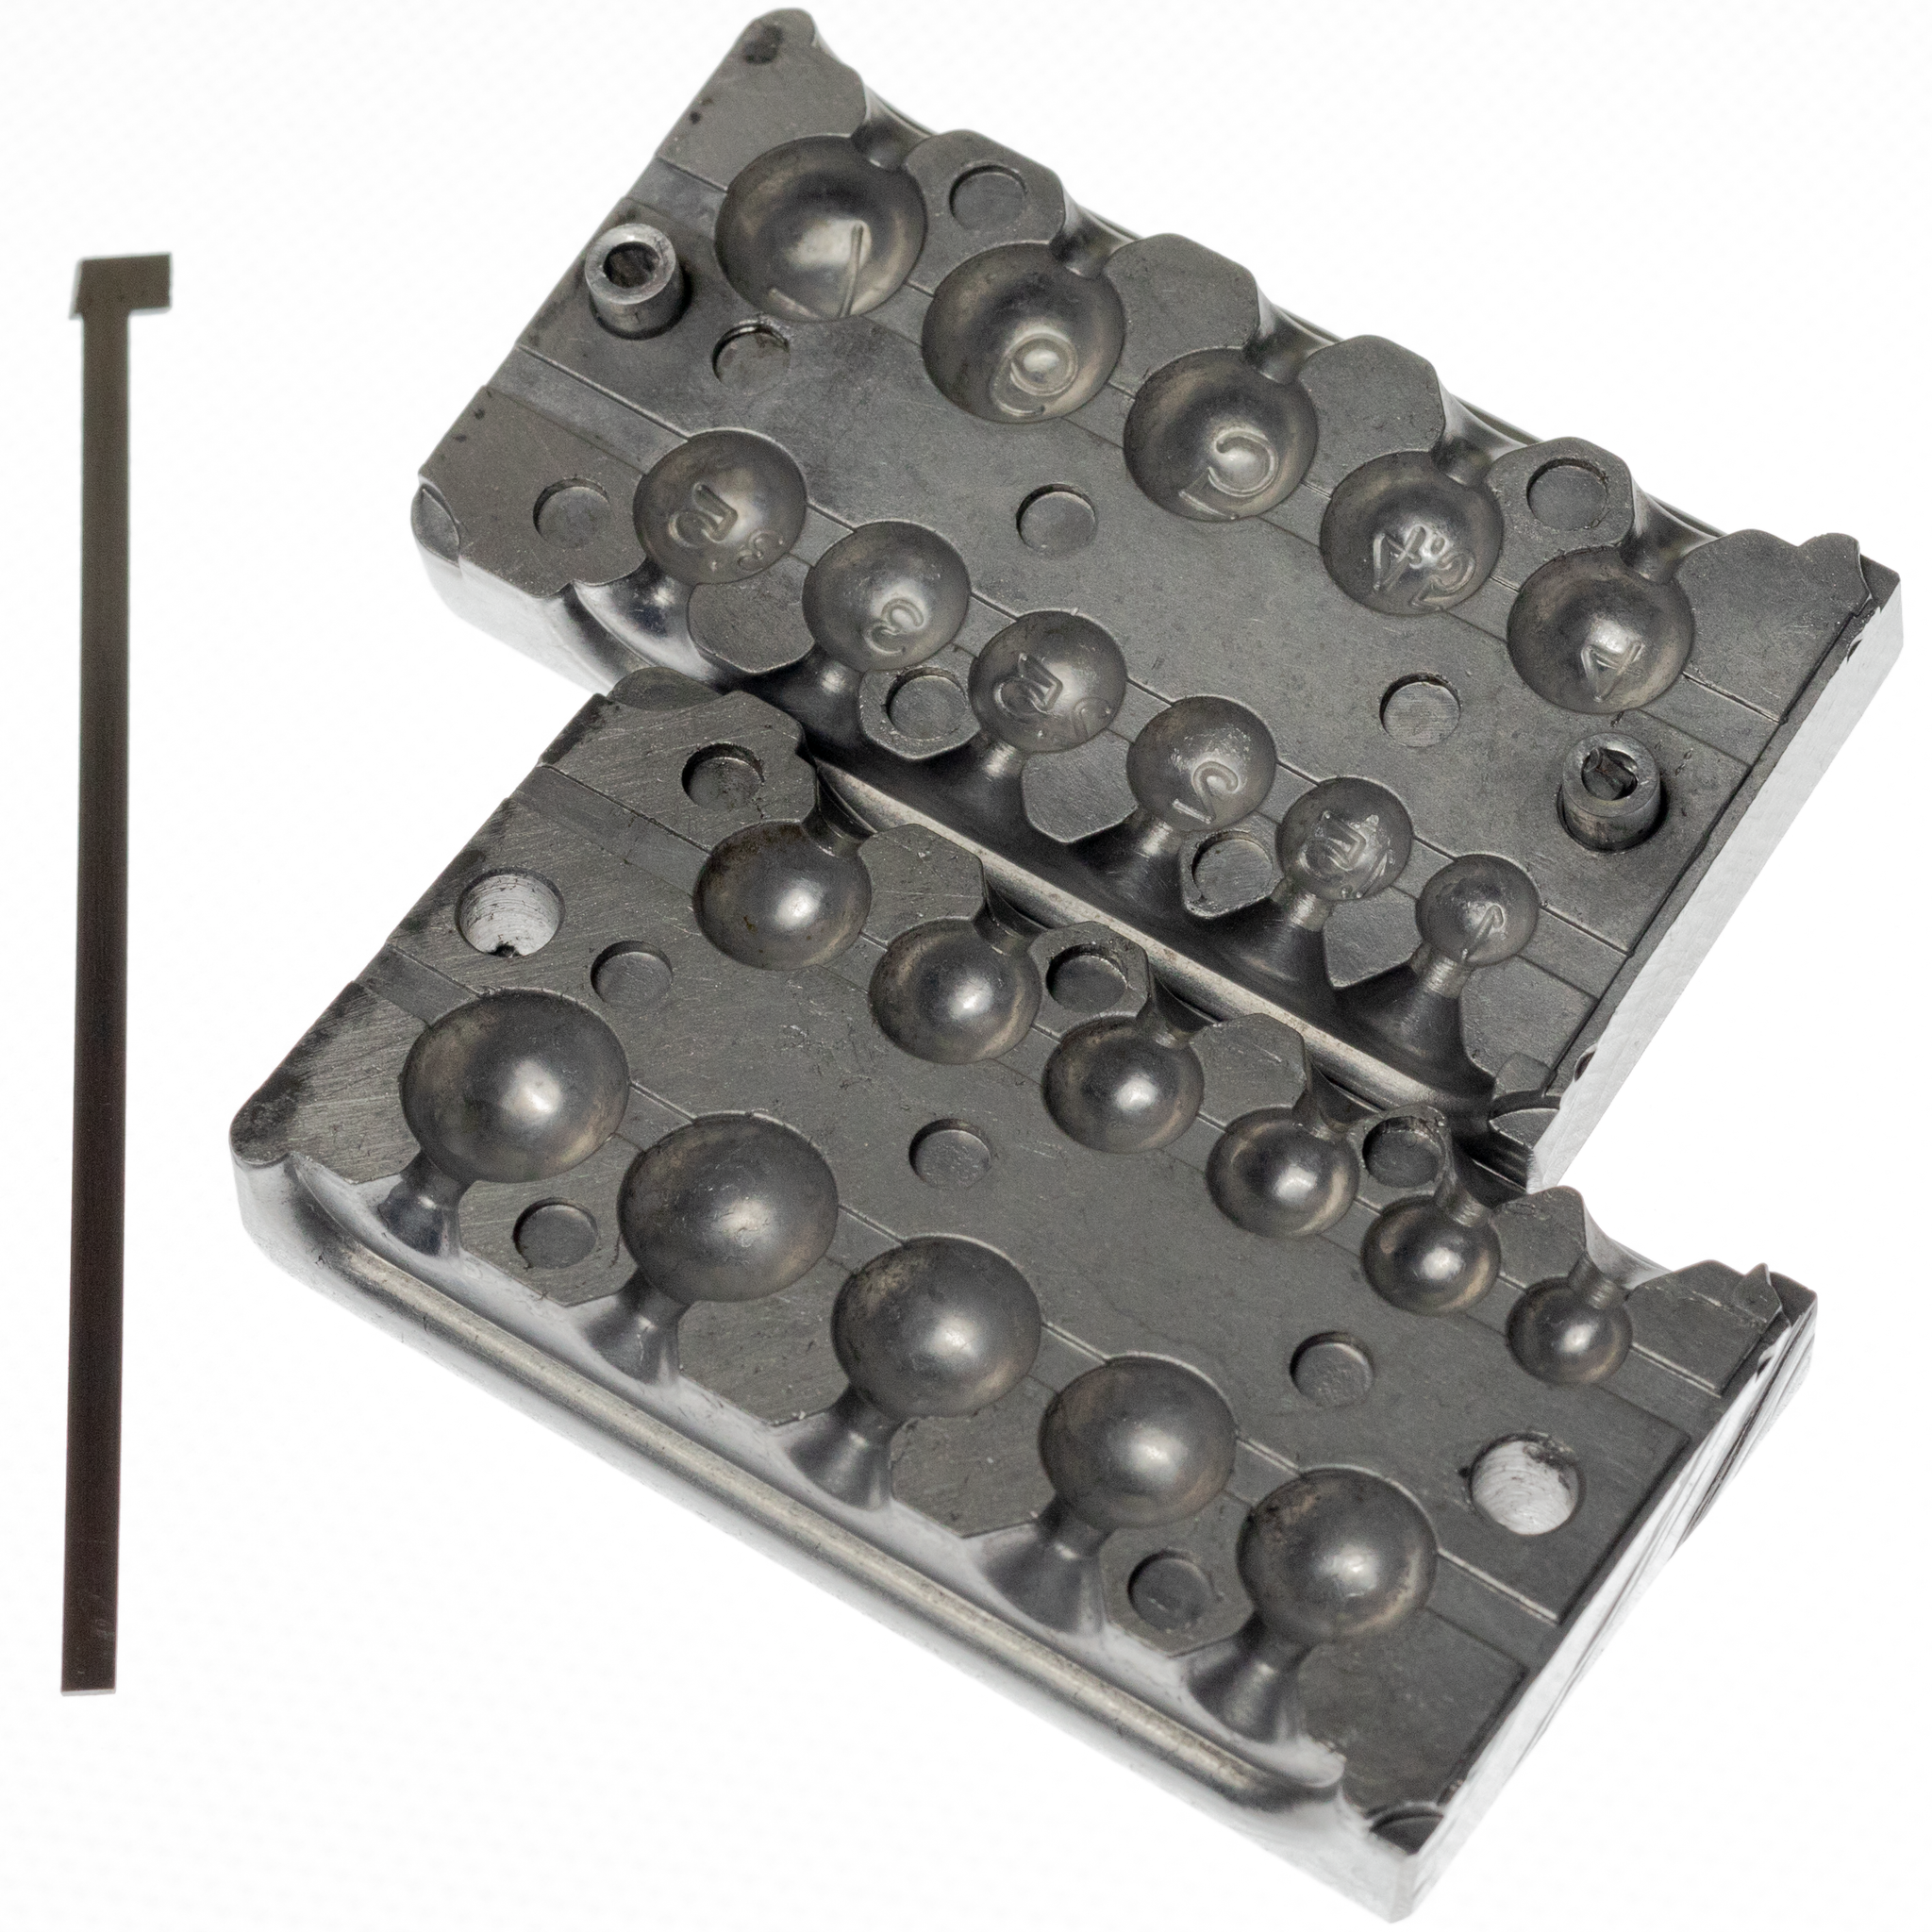 Mould for method feeder, Carp Leads, swimfeeder mould 82g lead or